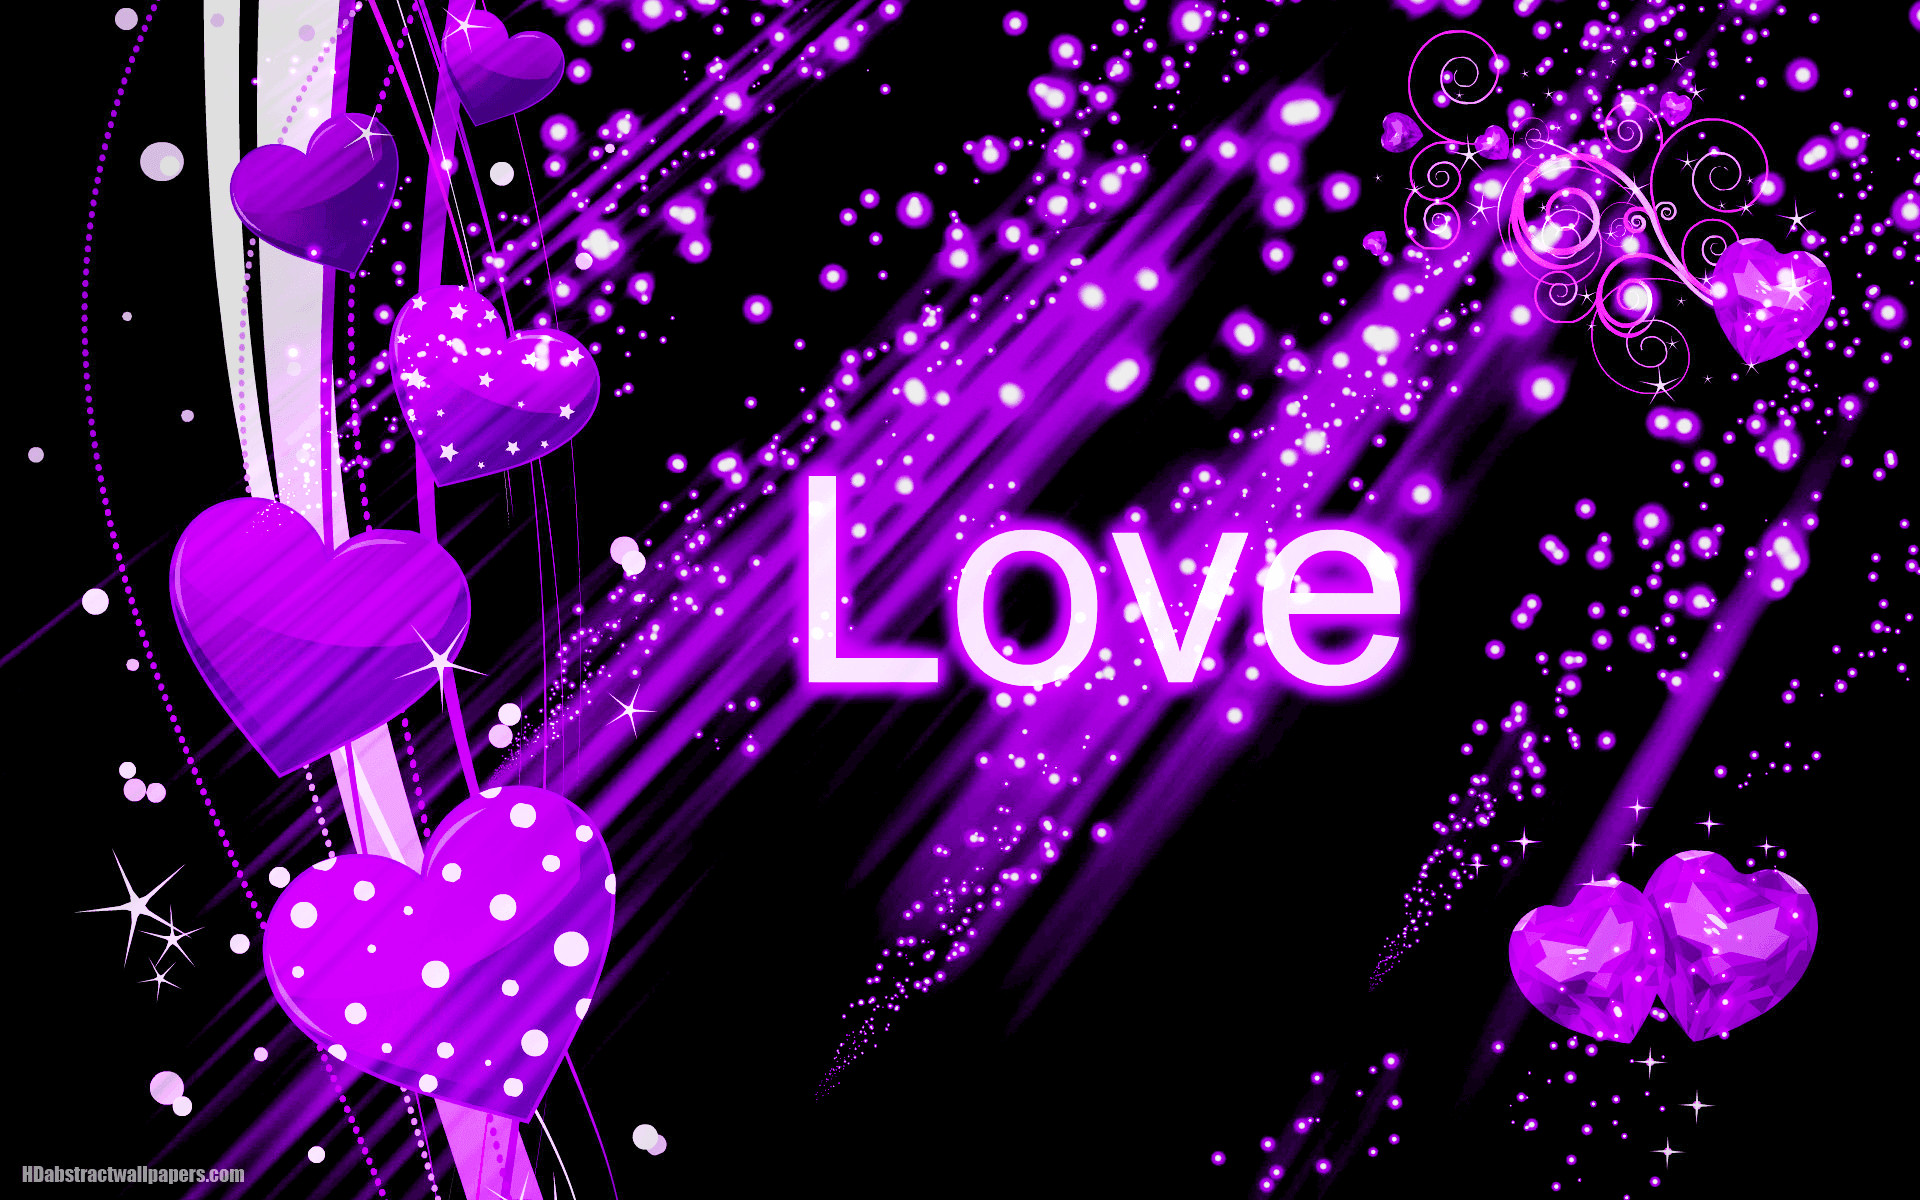 1920x1200 Beautiful black abstract wallpaper with purple love hearts and the text  love. Send this background to your boy or girlfriend, just to say that you  are ...